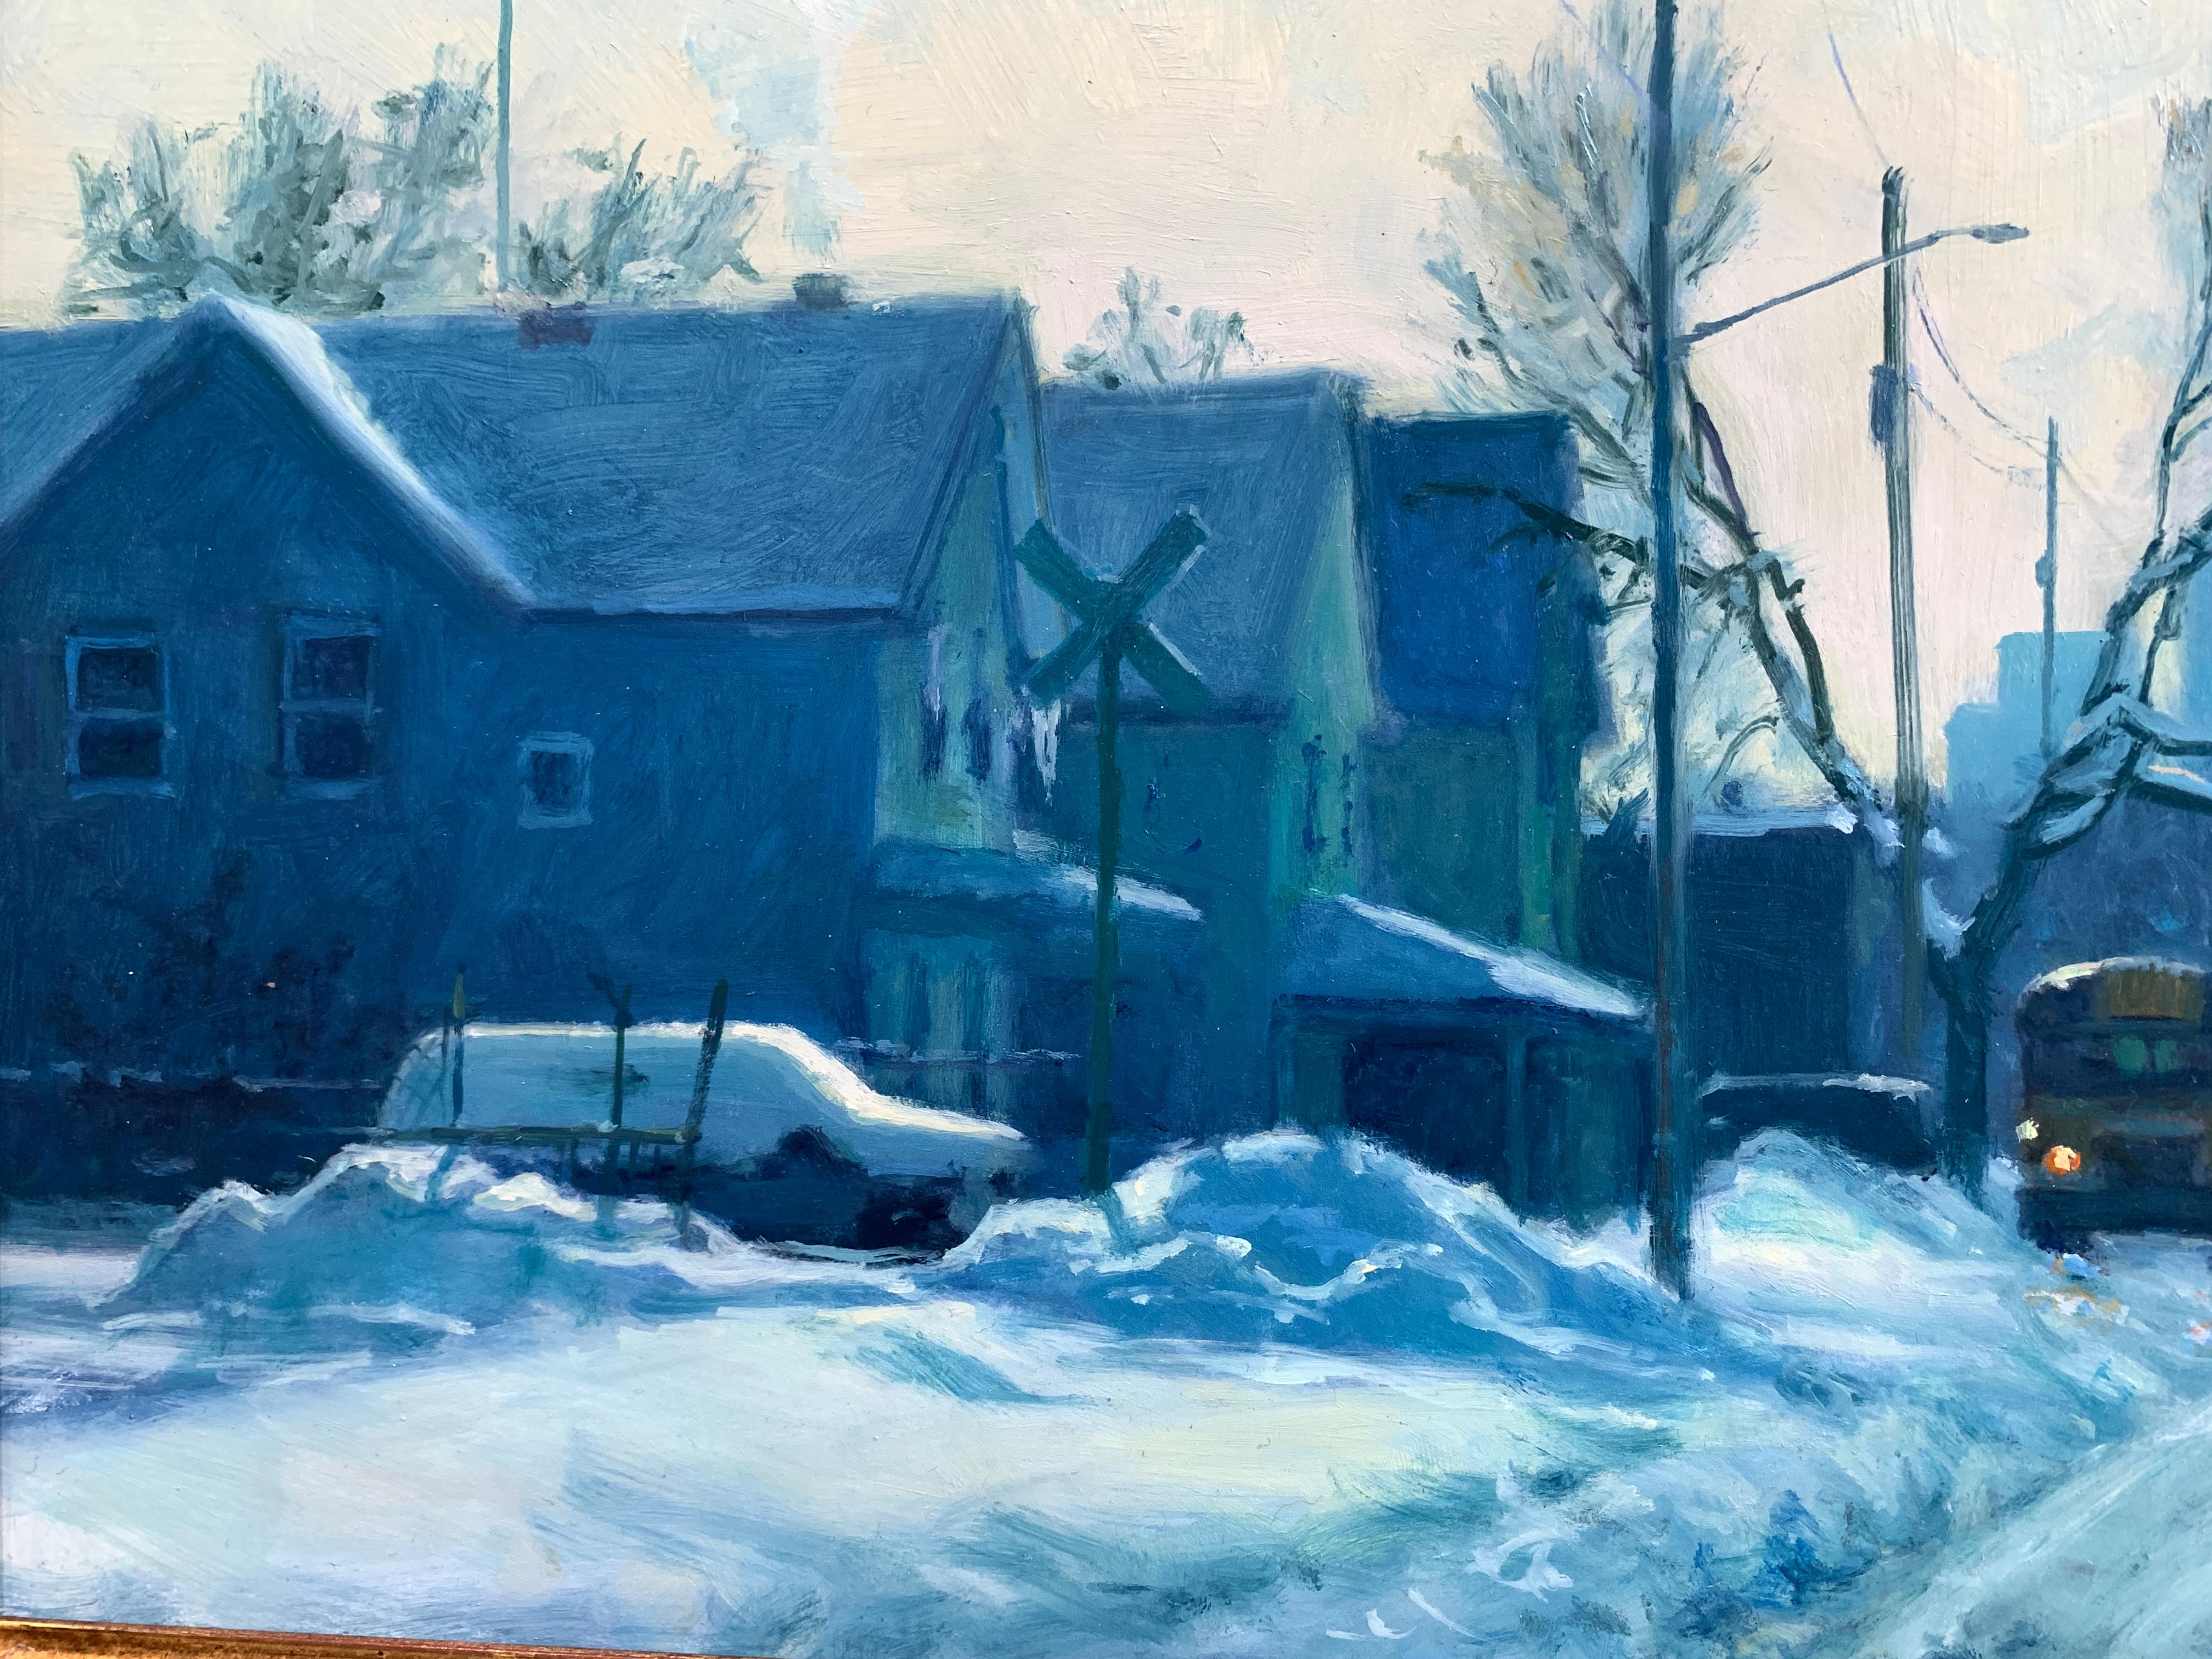 An oil painting of a snow-covered street, just outside the city in Minneapolis, Minnesota. The city skyline can be seen in the center horizon. A billow of smoke rises upward from a warehouse structure to the right. Suburban houses line the left side